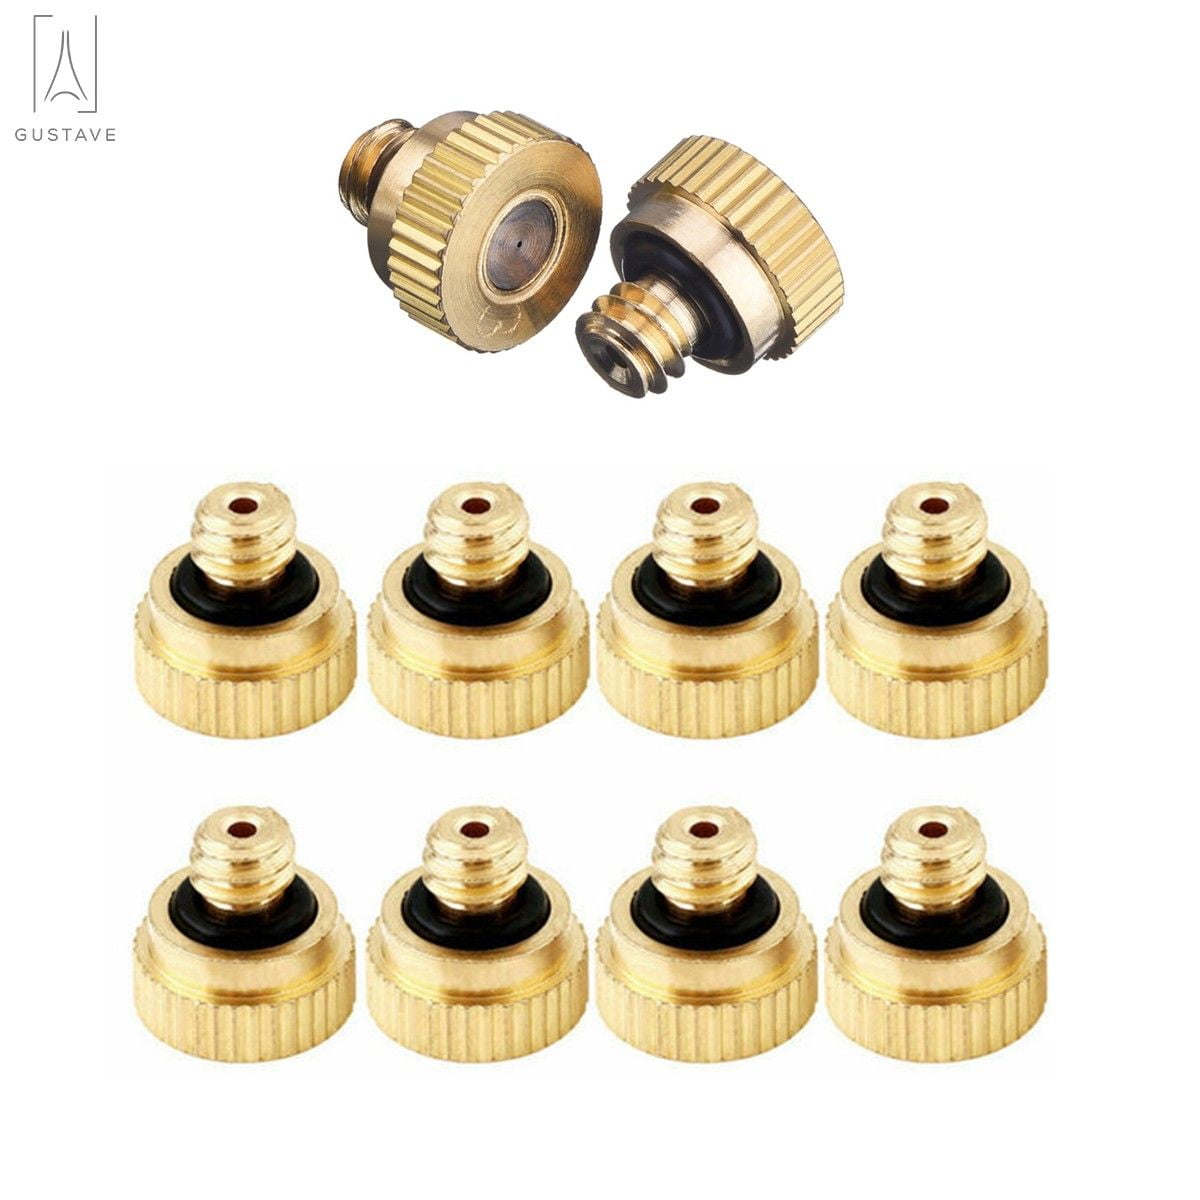 20/40 Brass Misting Nozzles Water Mister Sprinkle For Cooling System Garden Tool 